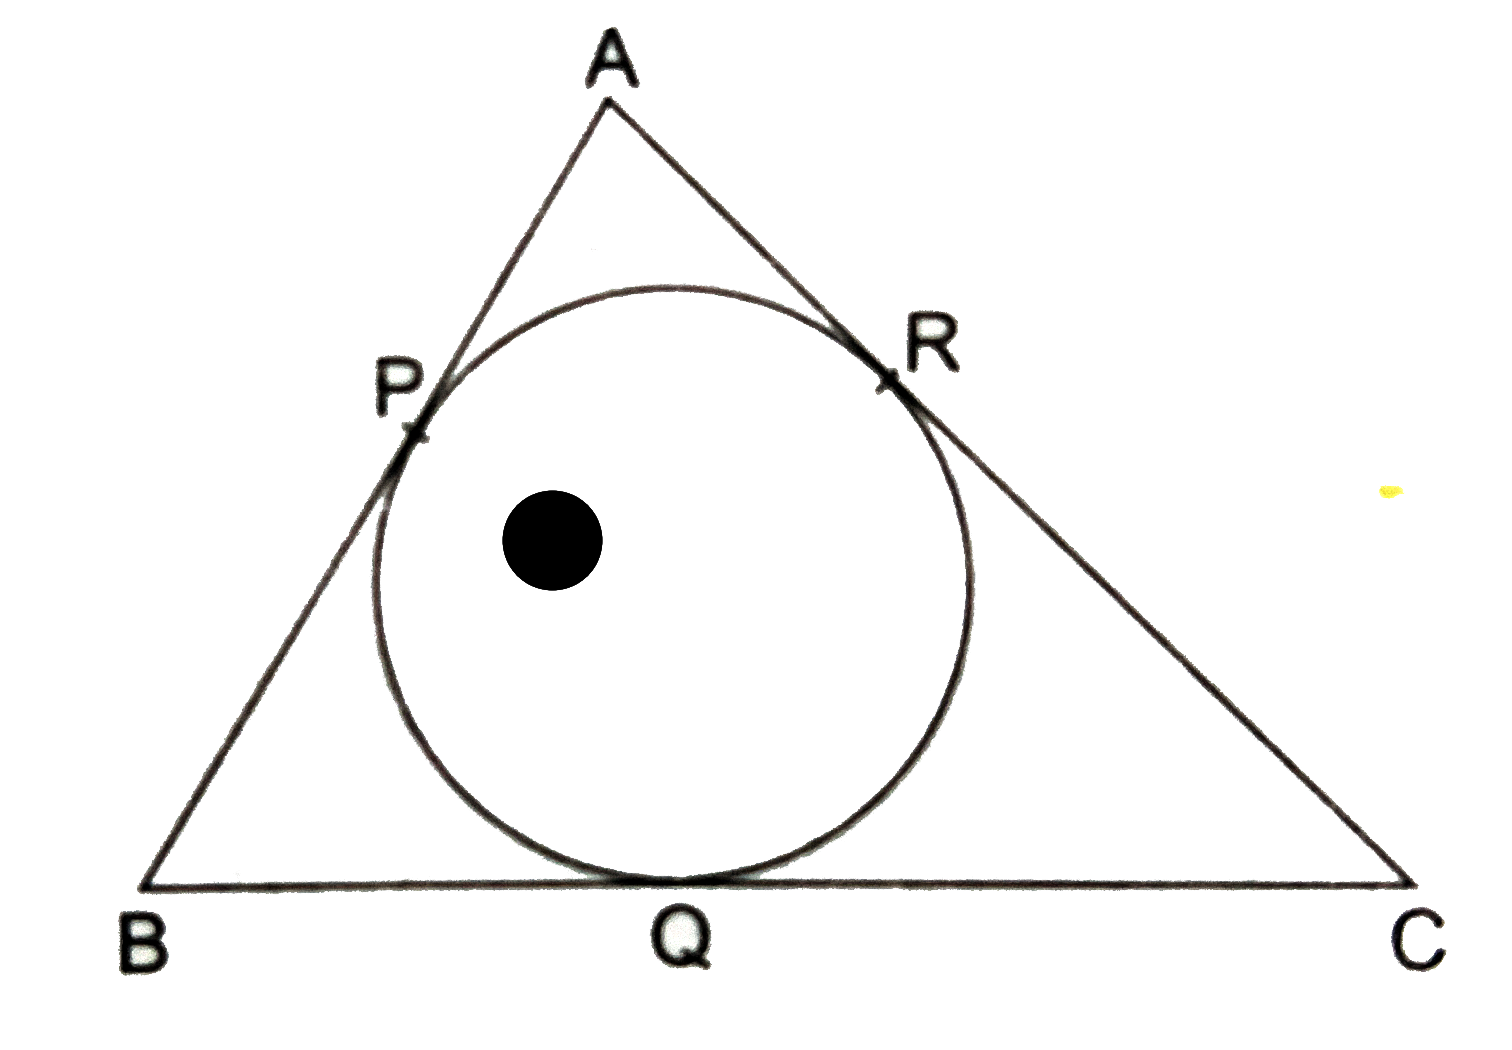 A circle is inscribed in a DeltaABC, touching AB, BC and AC at P, Q and R respectively. If AB=10cm, AR=7cm and CR=5cm, find the length of BC.